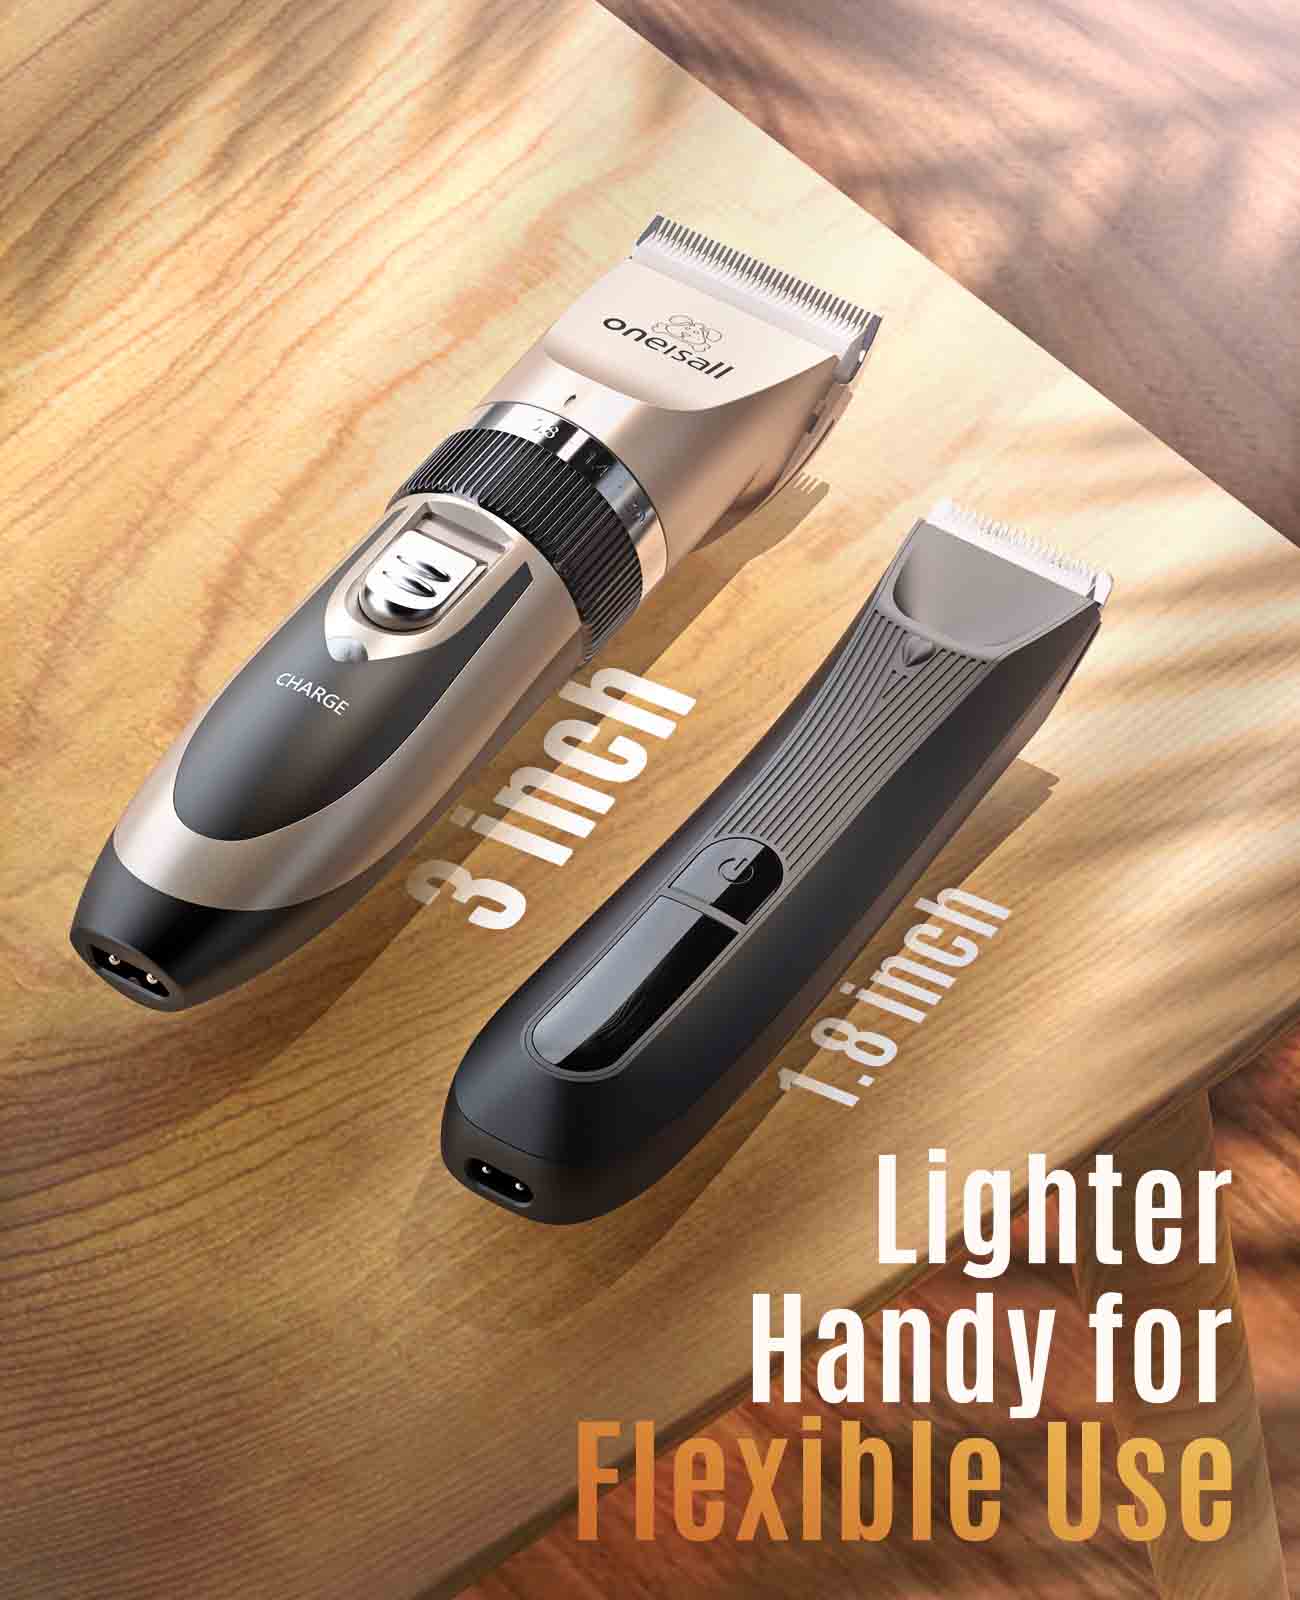 
                  
                    HT 872 - Oneisall Dog Hair Clippers with LED
                  
                